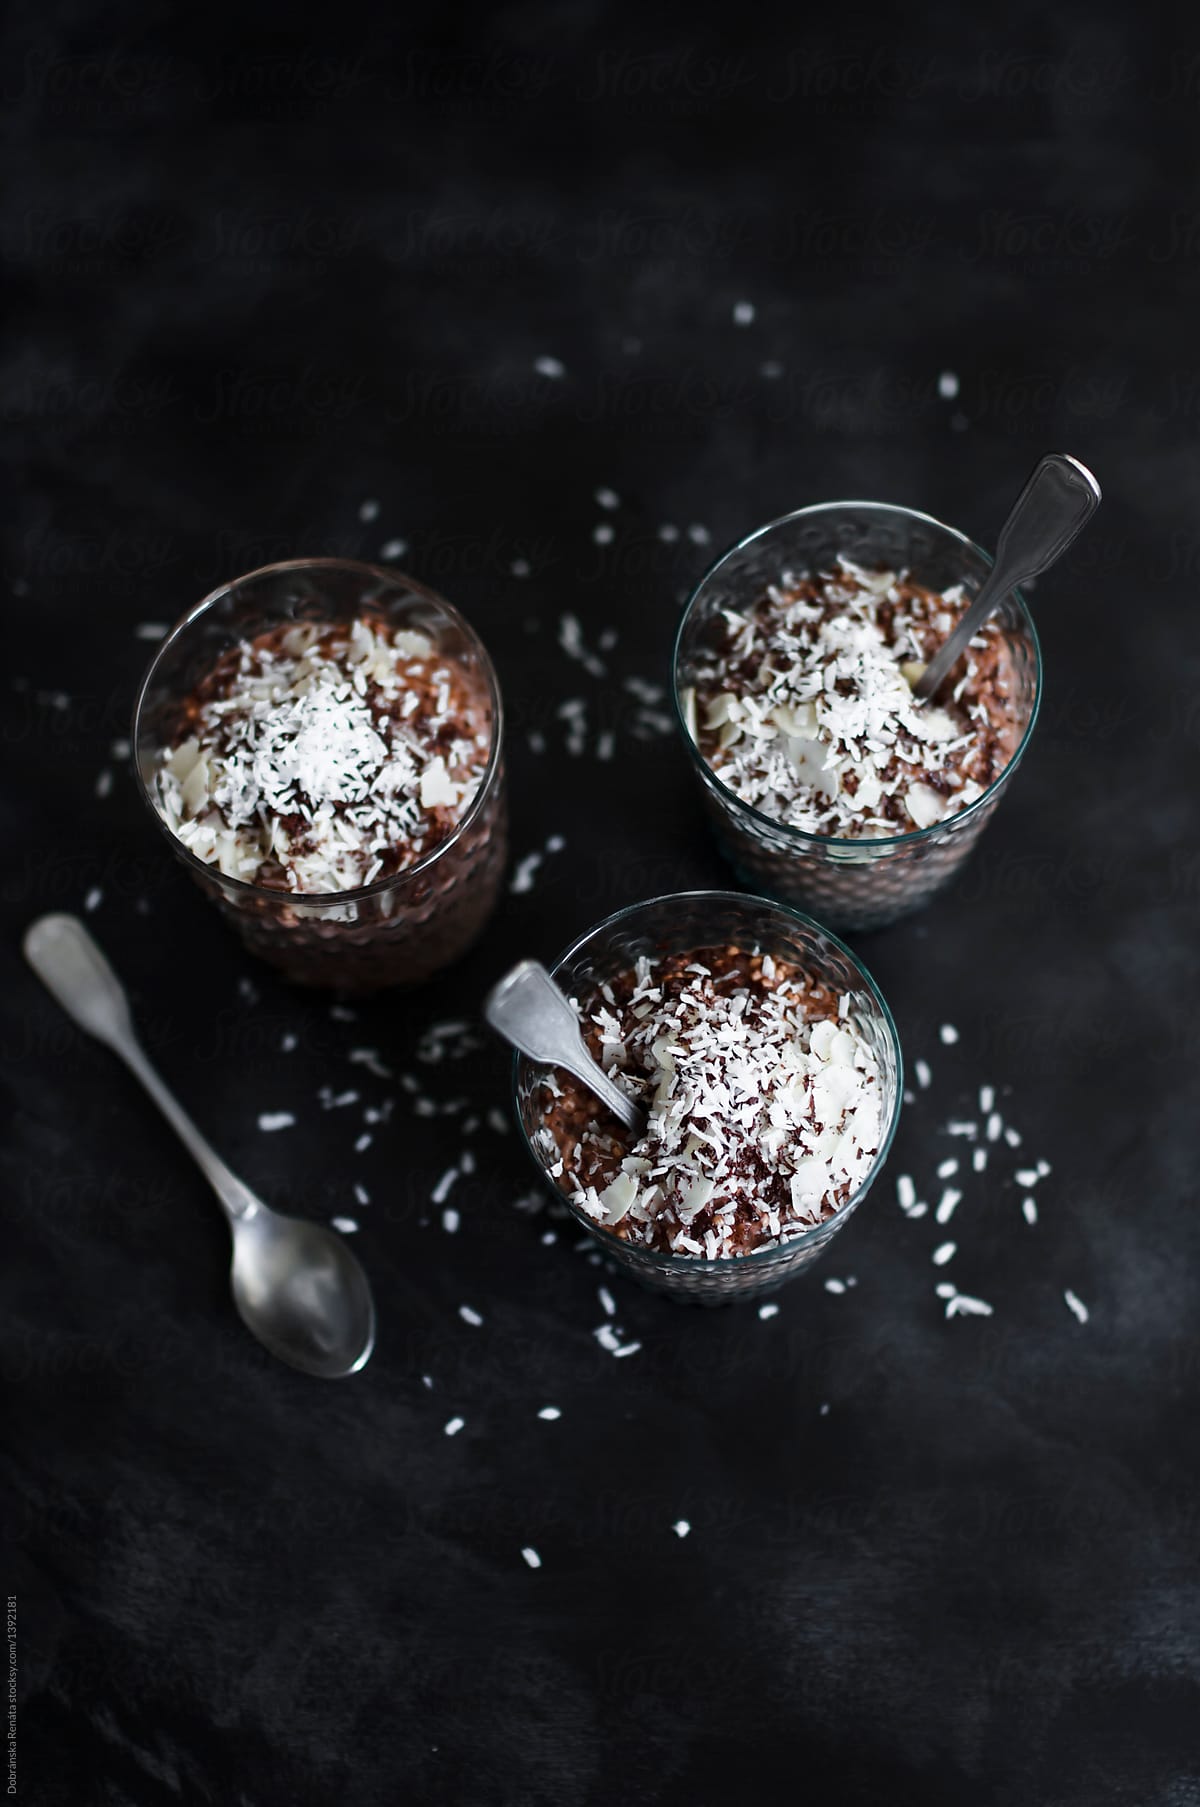 Chocolate tapioca pudding with coconut and almond.